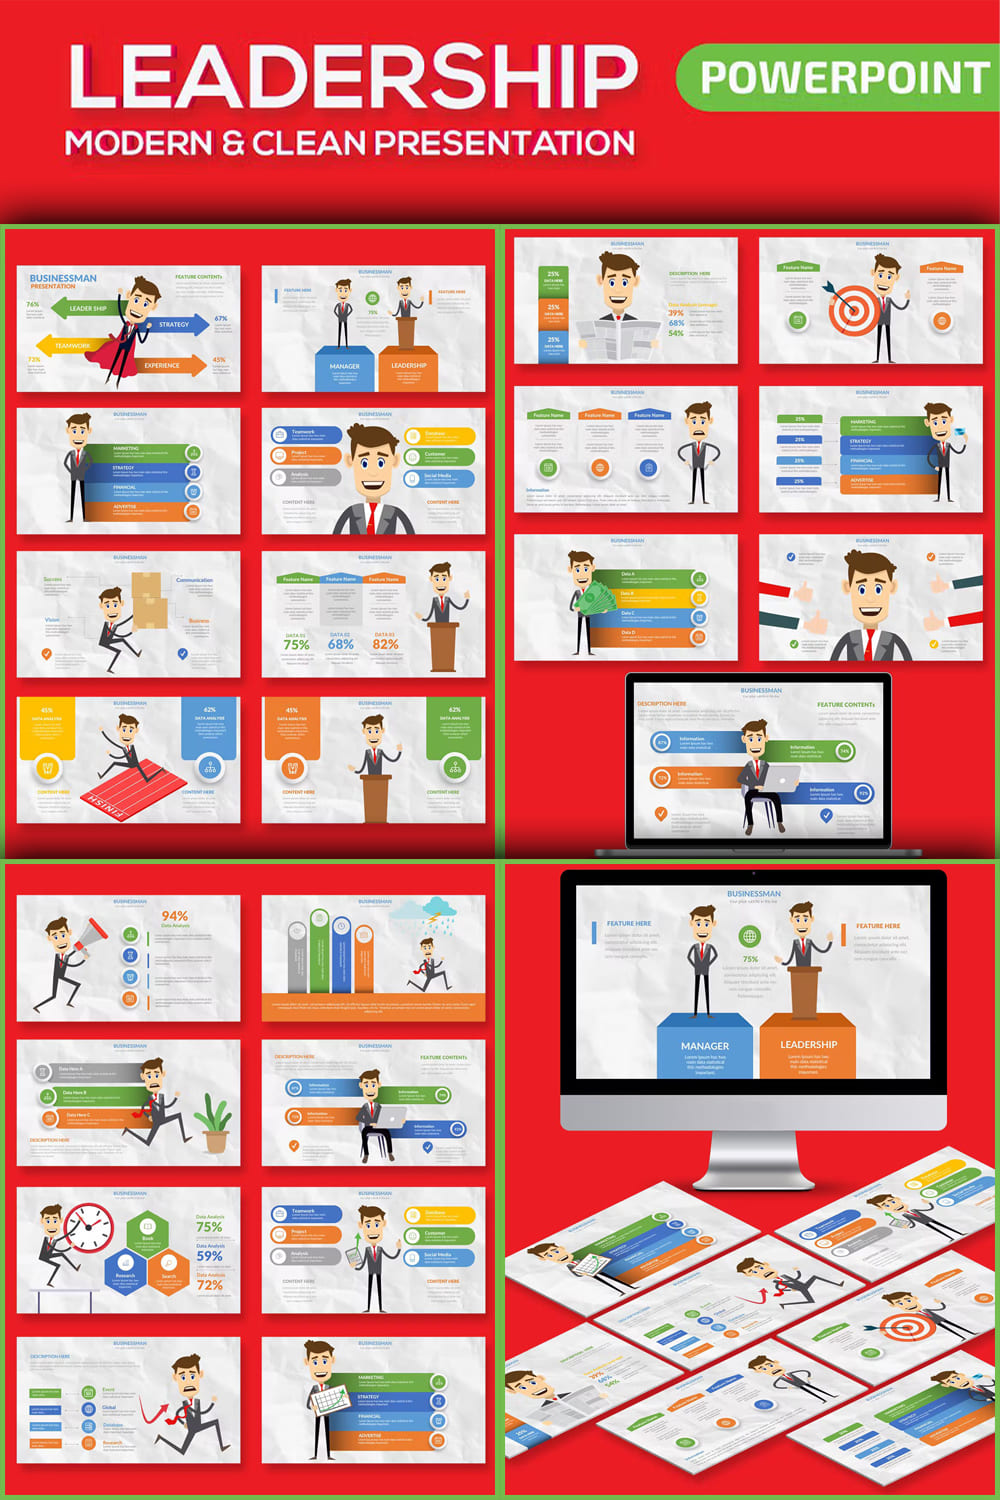 Collection of images of colorful presentation template slides on the theme of leadership.